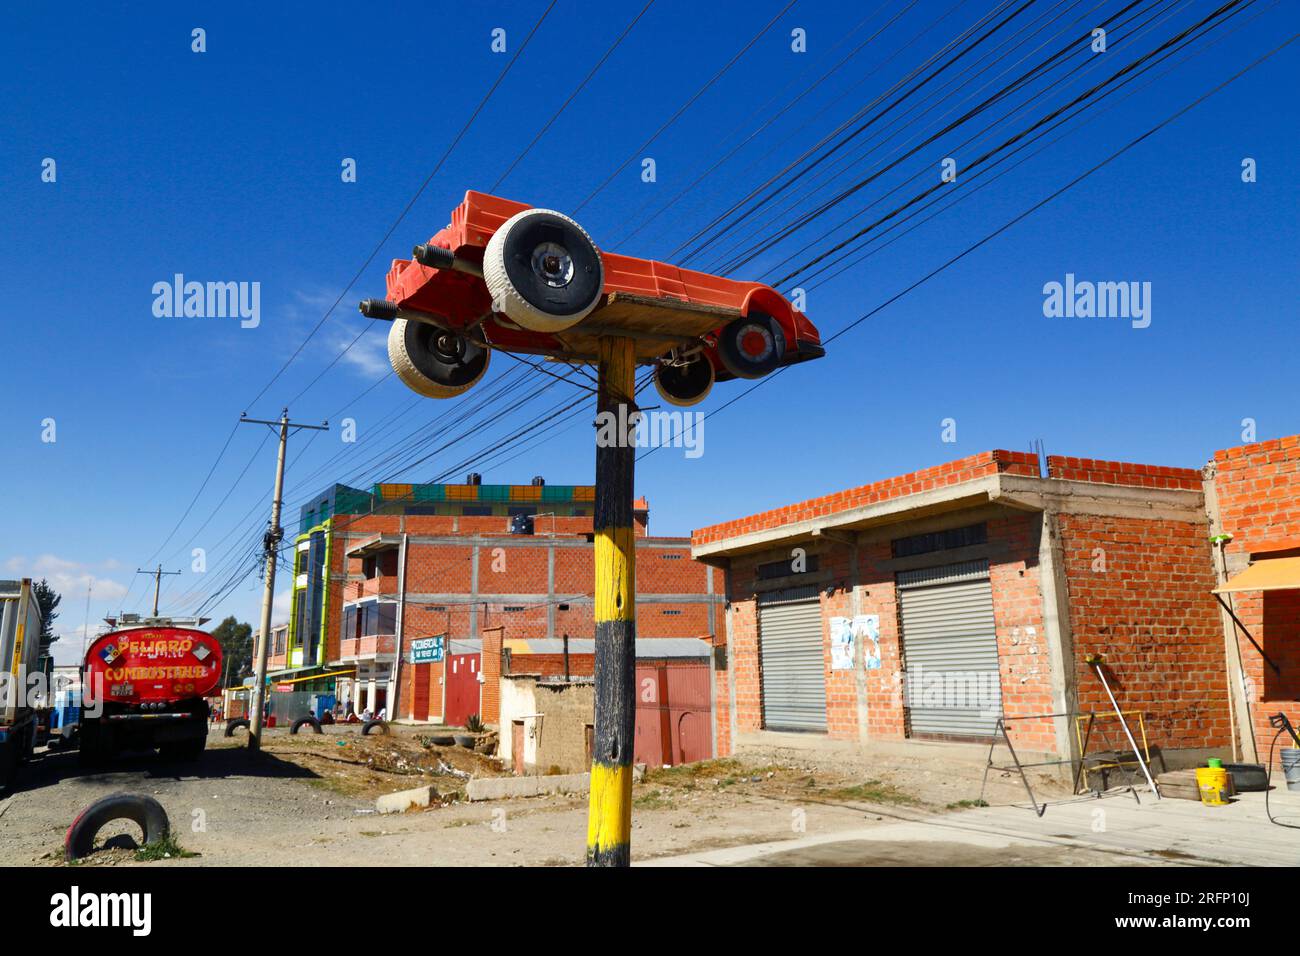 Large plastic toy car on painted wooden post outside car washing business next to main road, El Alto, Bolivia Stock Photo